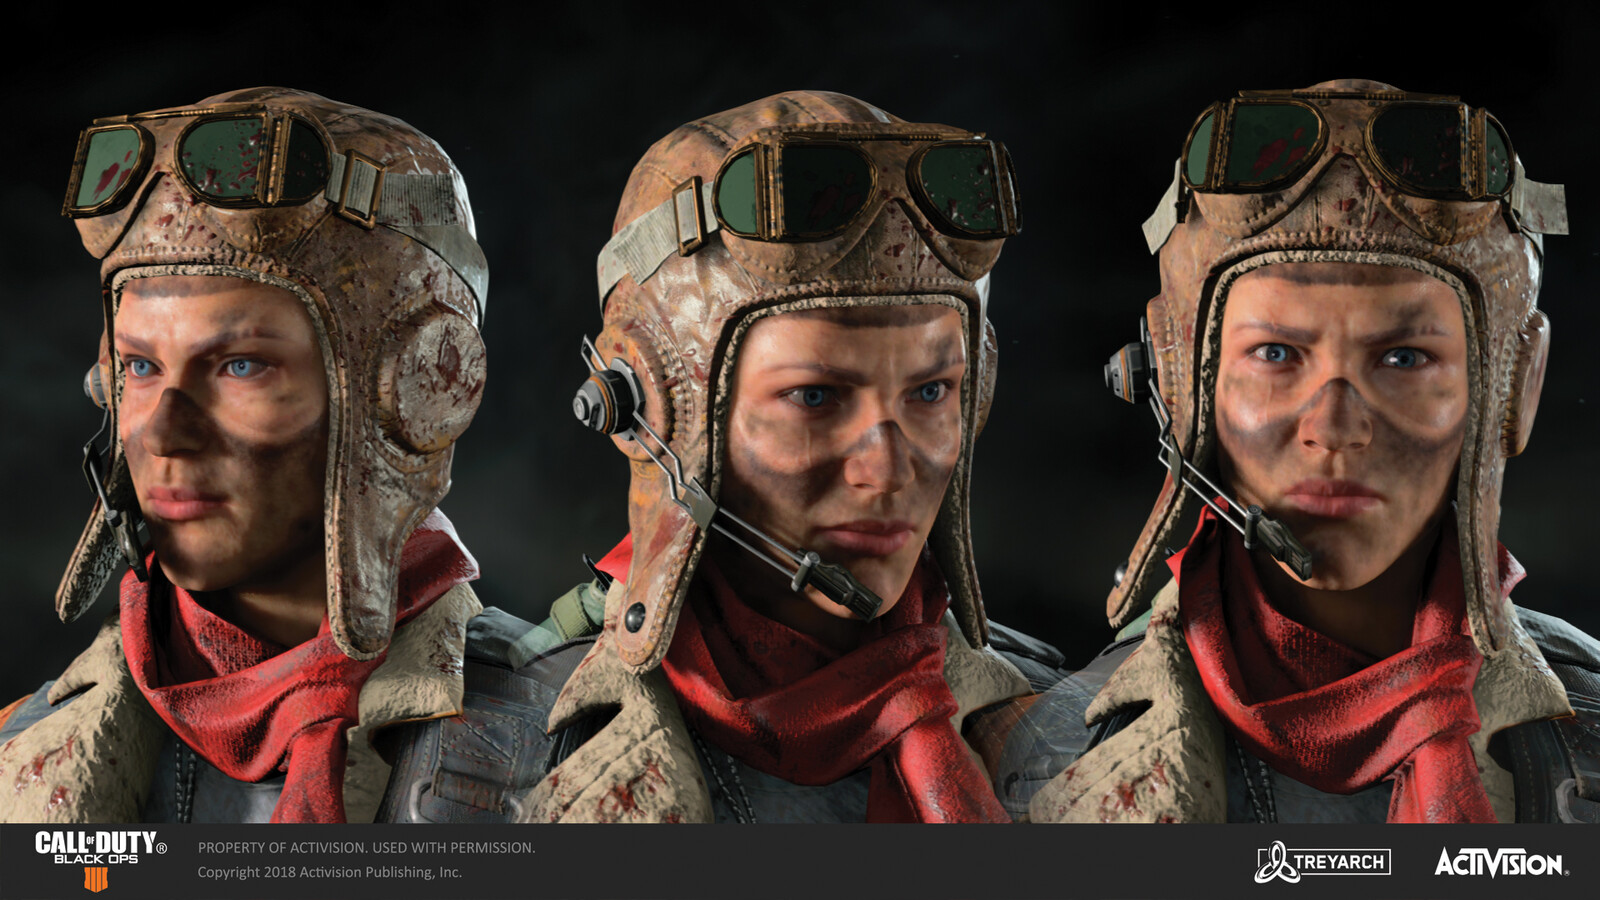 Body for this skin was designed by Karakter, and headgear/warpaint designed by MuYoung Kim.